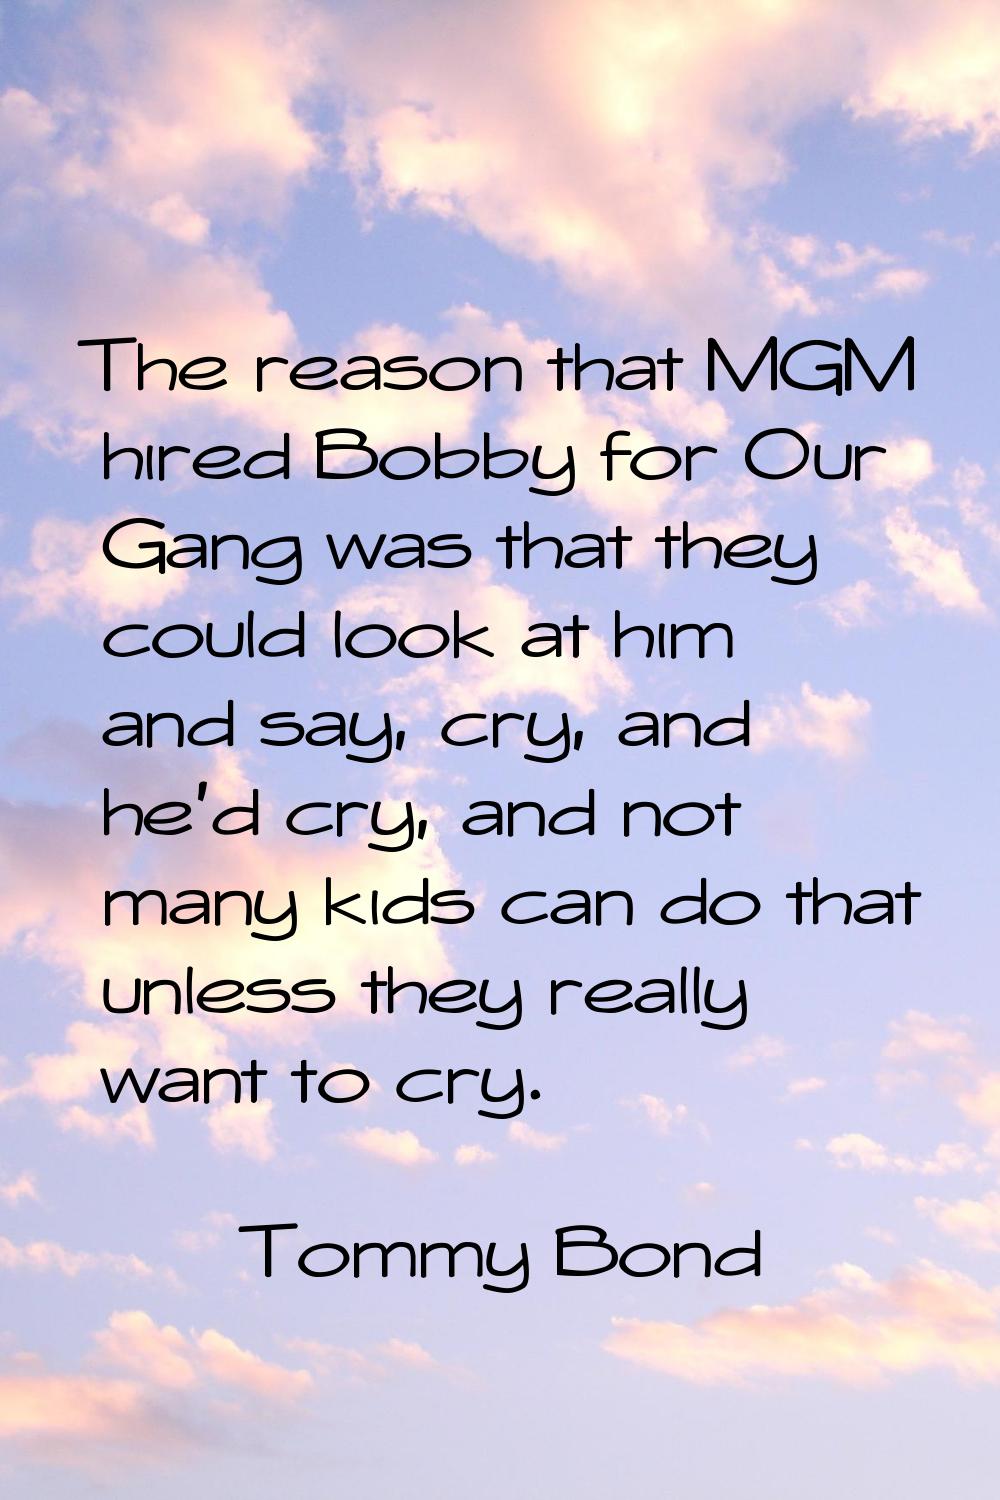 The reason that MGM hired Bobby for Our Gang was that they could look at him and say, cry, and he'd